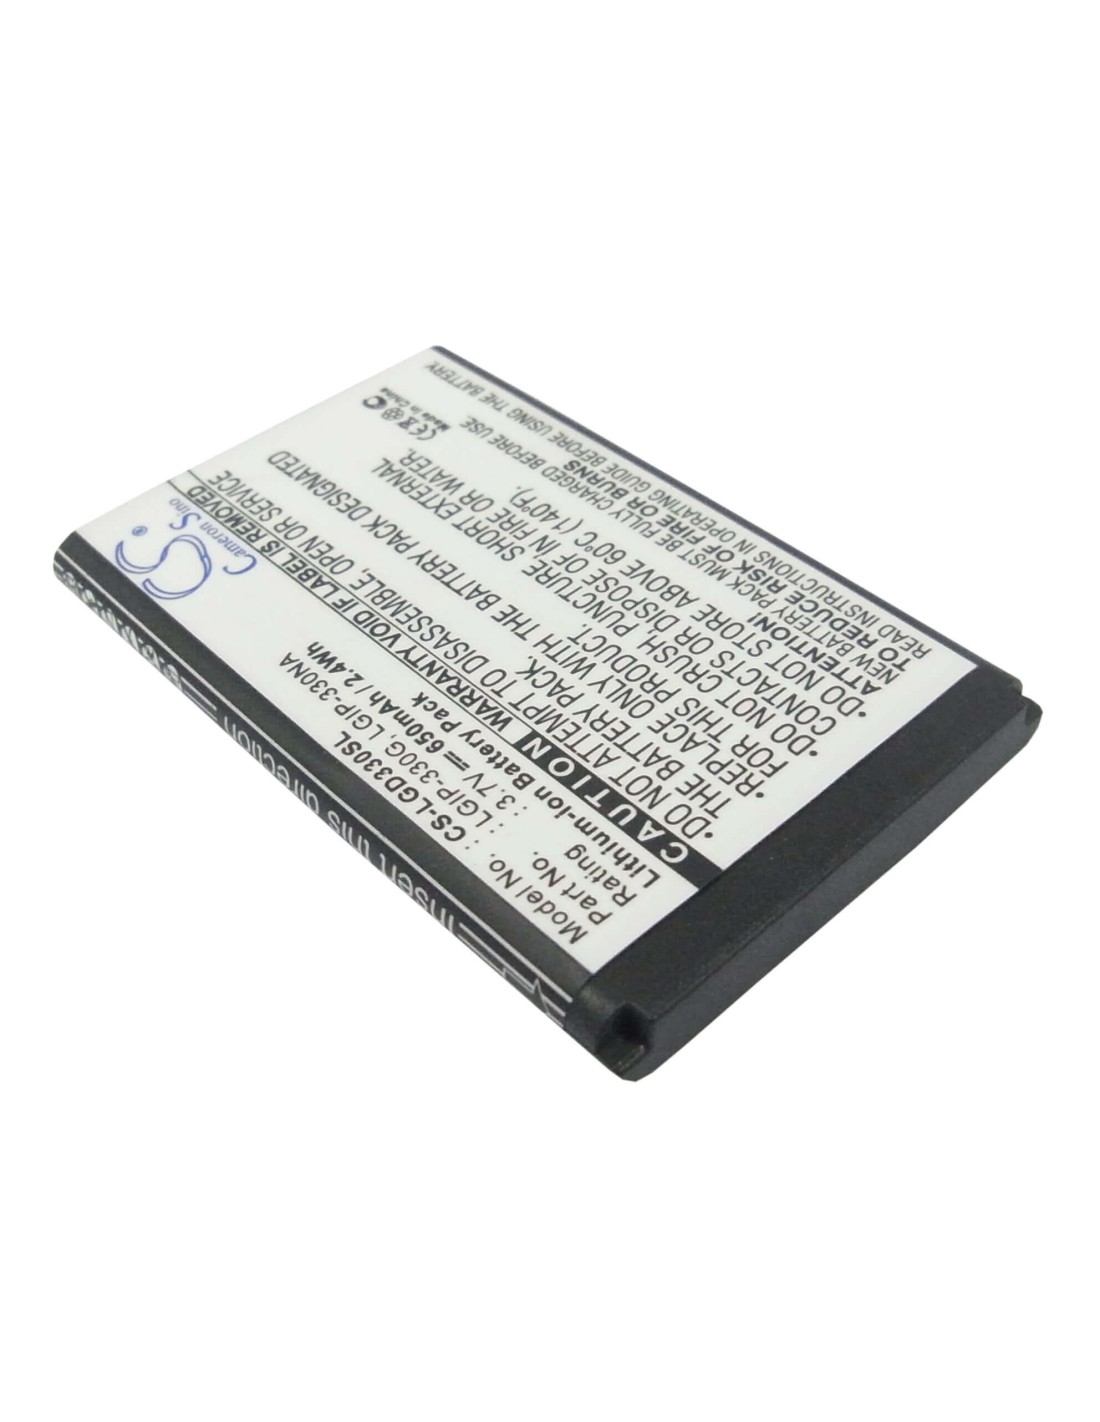 Battery for LG GD350, GB230, GB220 3.7V, 650mAh - 2.41Wh